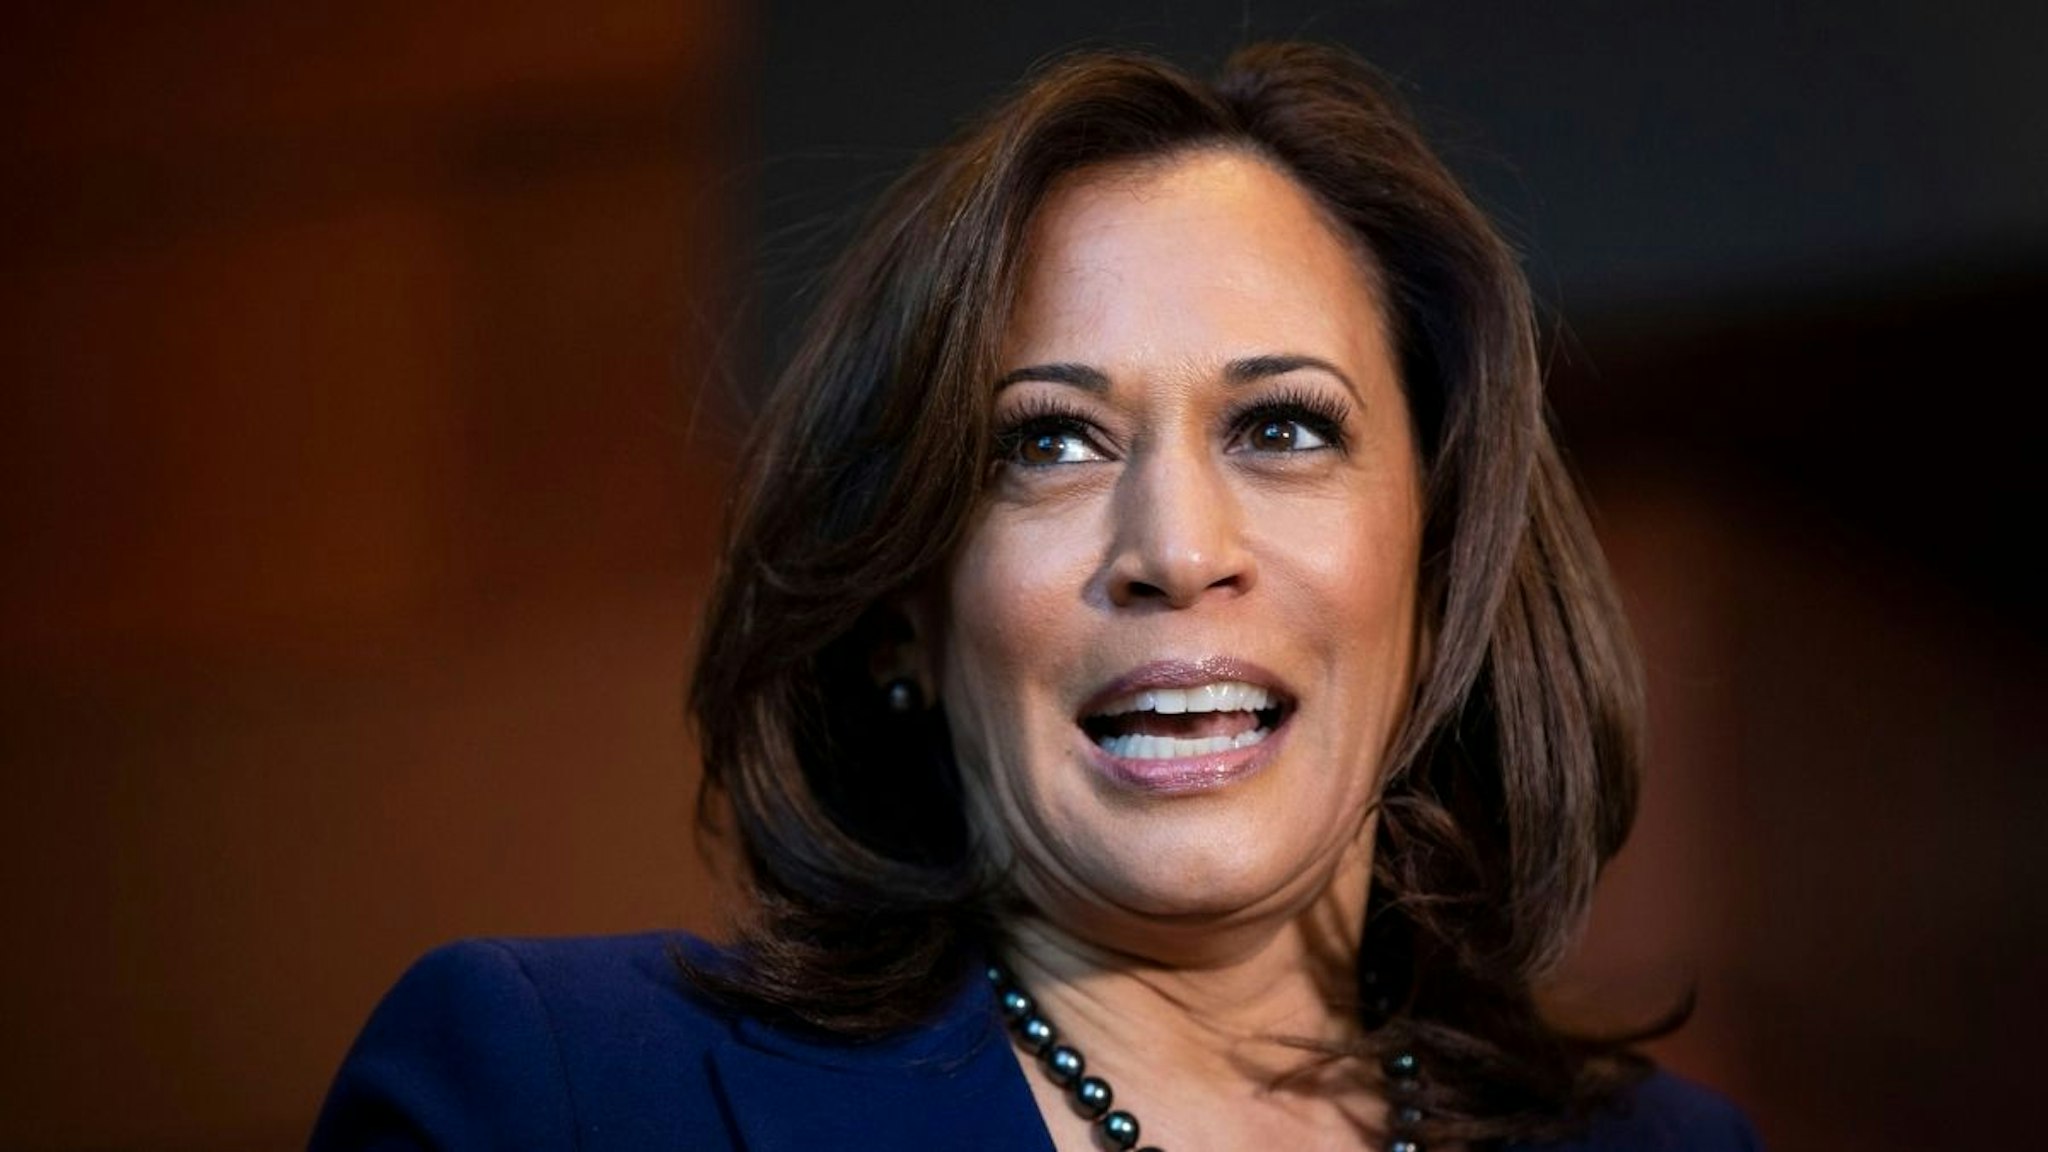 U.S. Sen. Kamala Harris (D-CA) speaks to reporters after announcing her candidacy for President of the United States, at Howard University, her alma mater, on January 21, 2019 in Washington, DC. Harris is the first African-American woman to announce a run for the White House in 2020.